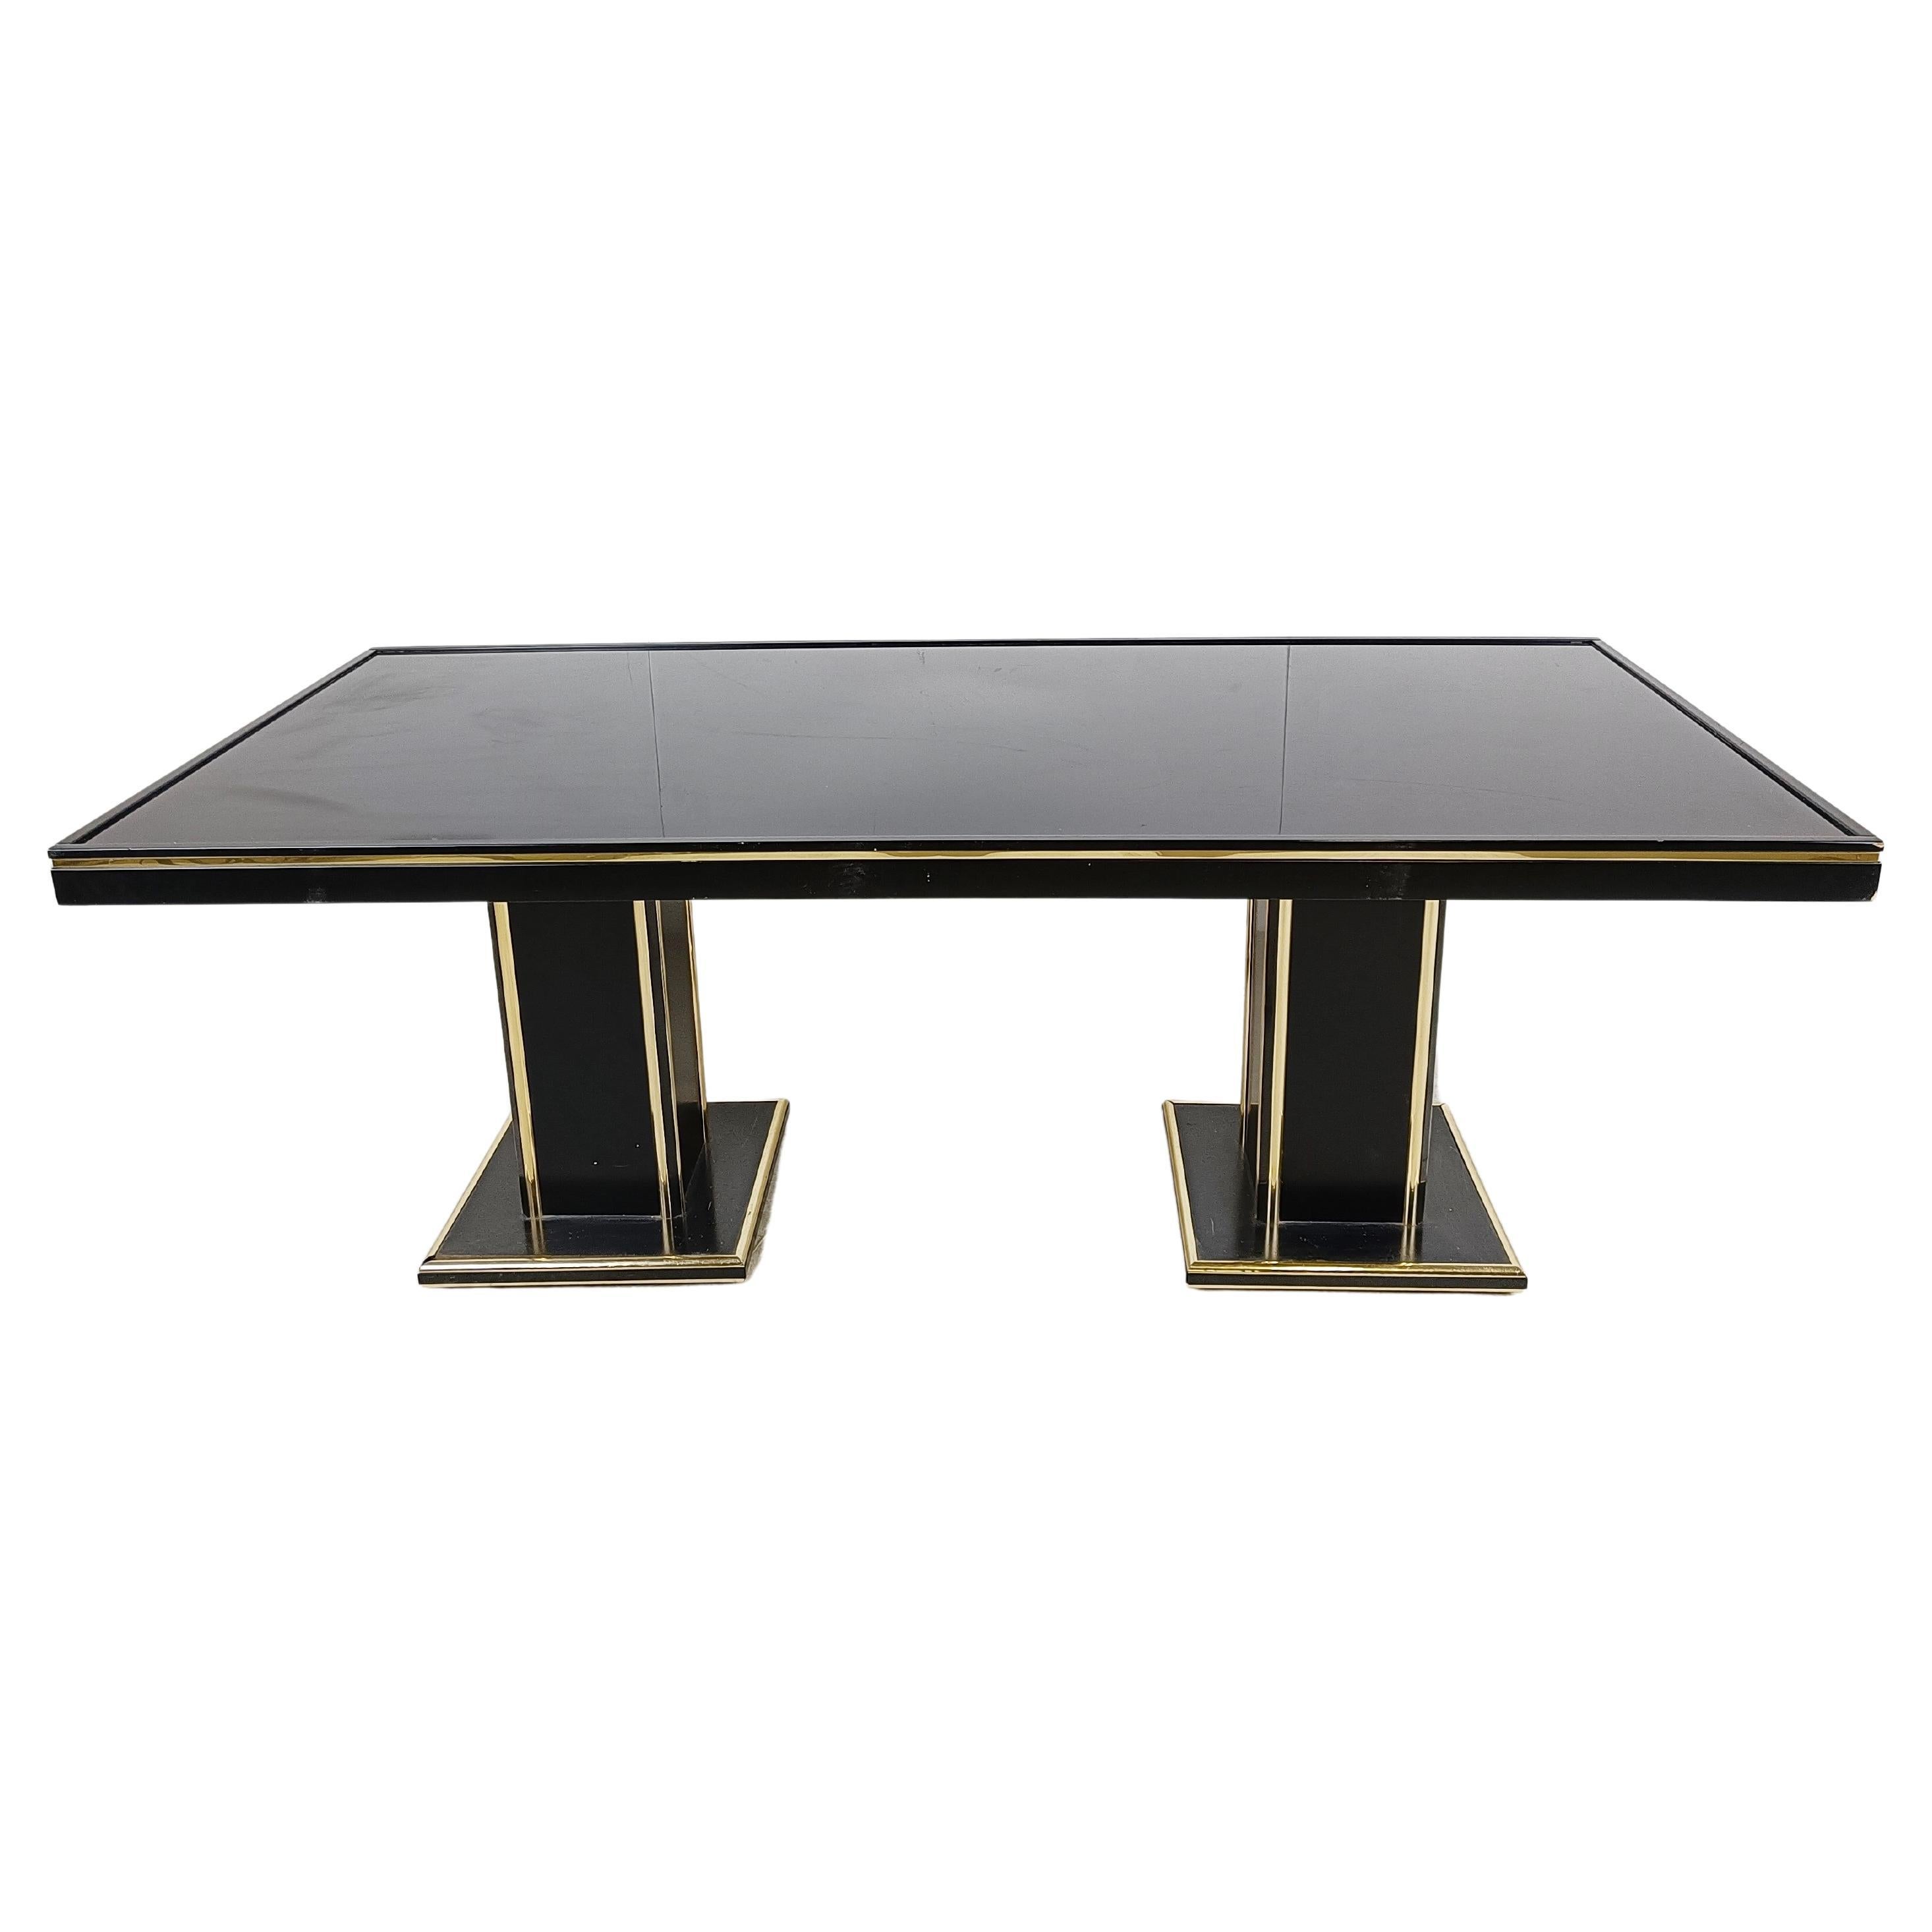 Vintage lacquer and brass dining table, 1970s